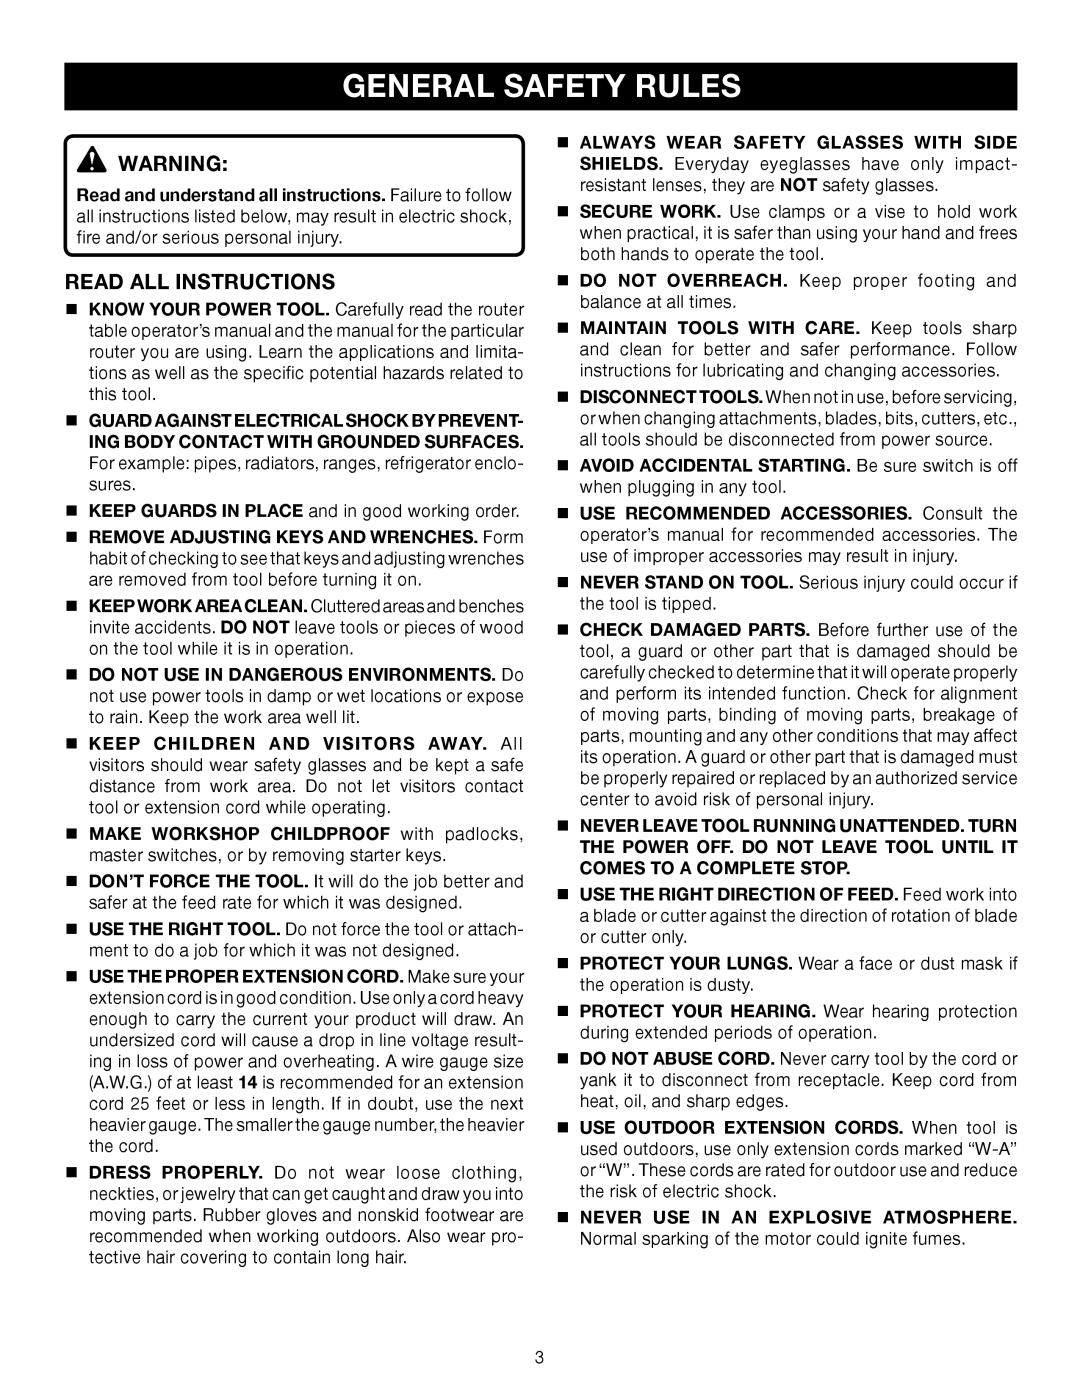 Ryobi A25RT02 manual General Safety Rules, Read All Instructions 